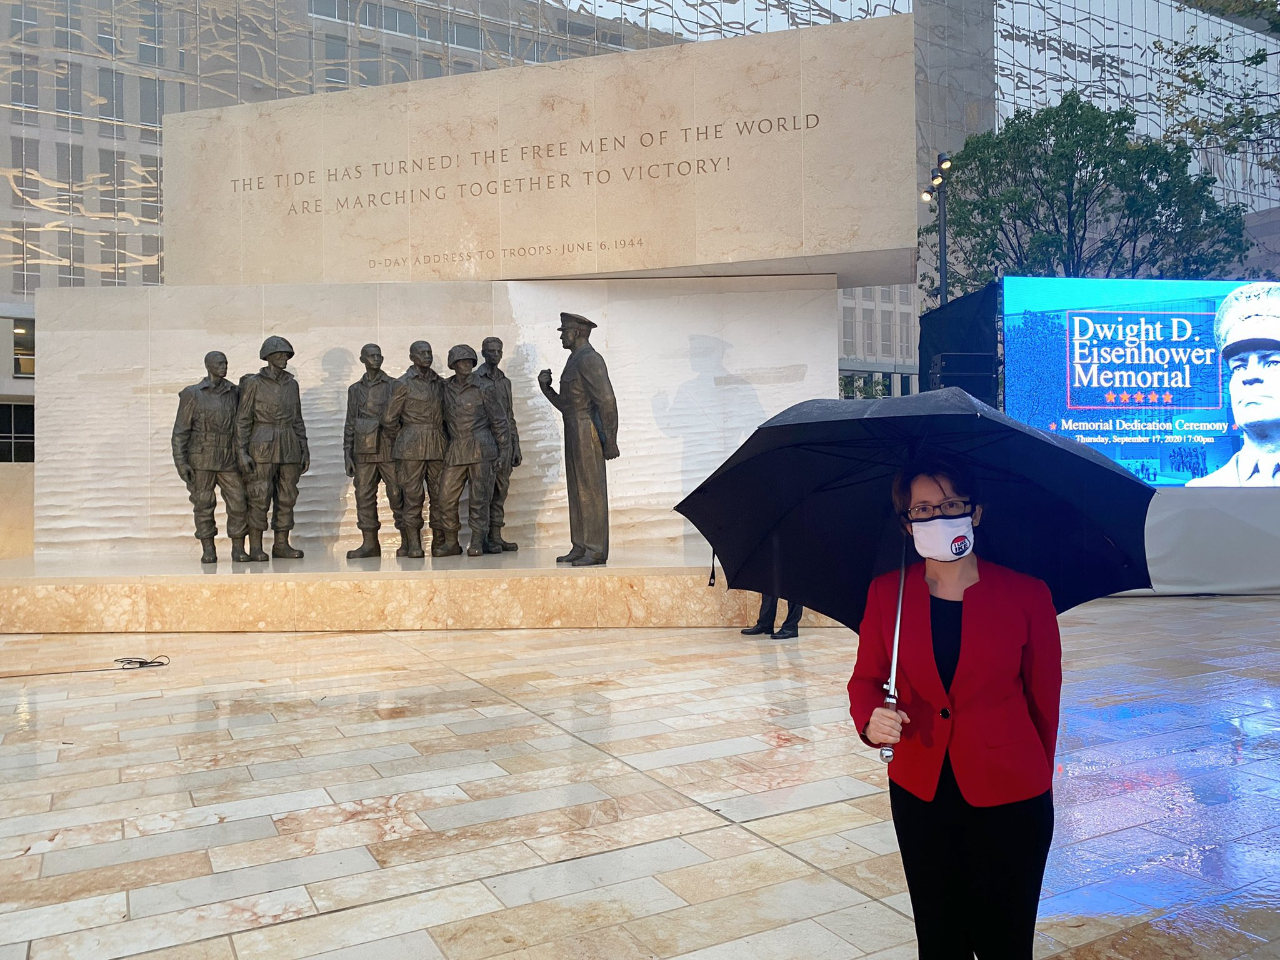 Taiwan Representative Bi-khim Hsiao attended the dedication ceremony of Dwight D. Eisenhower Memorial on September 17, 2020, to recognize former President Eisenhower’s firm support to Taiwan’s security and democracy.